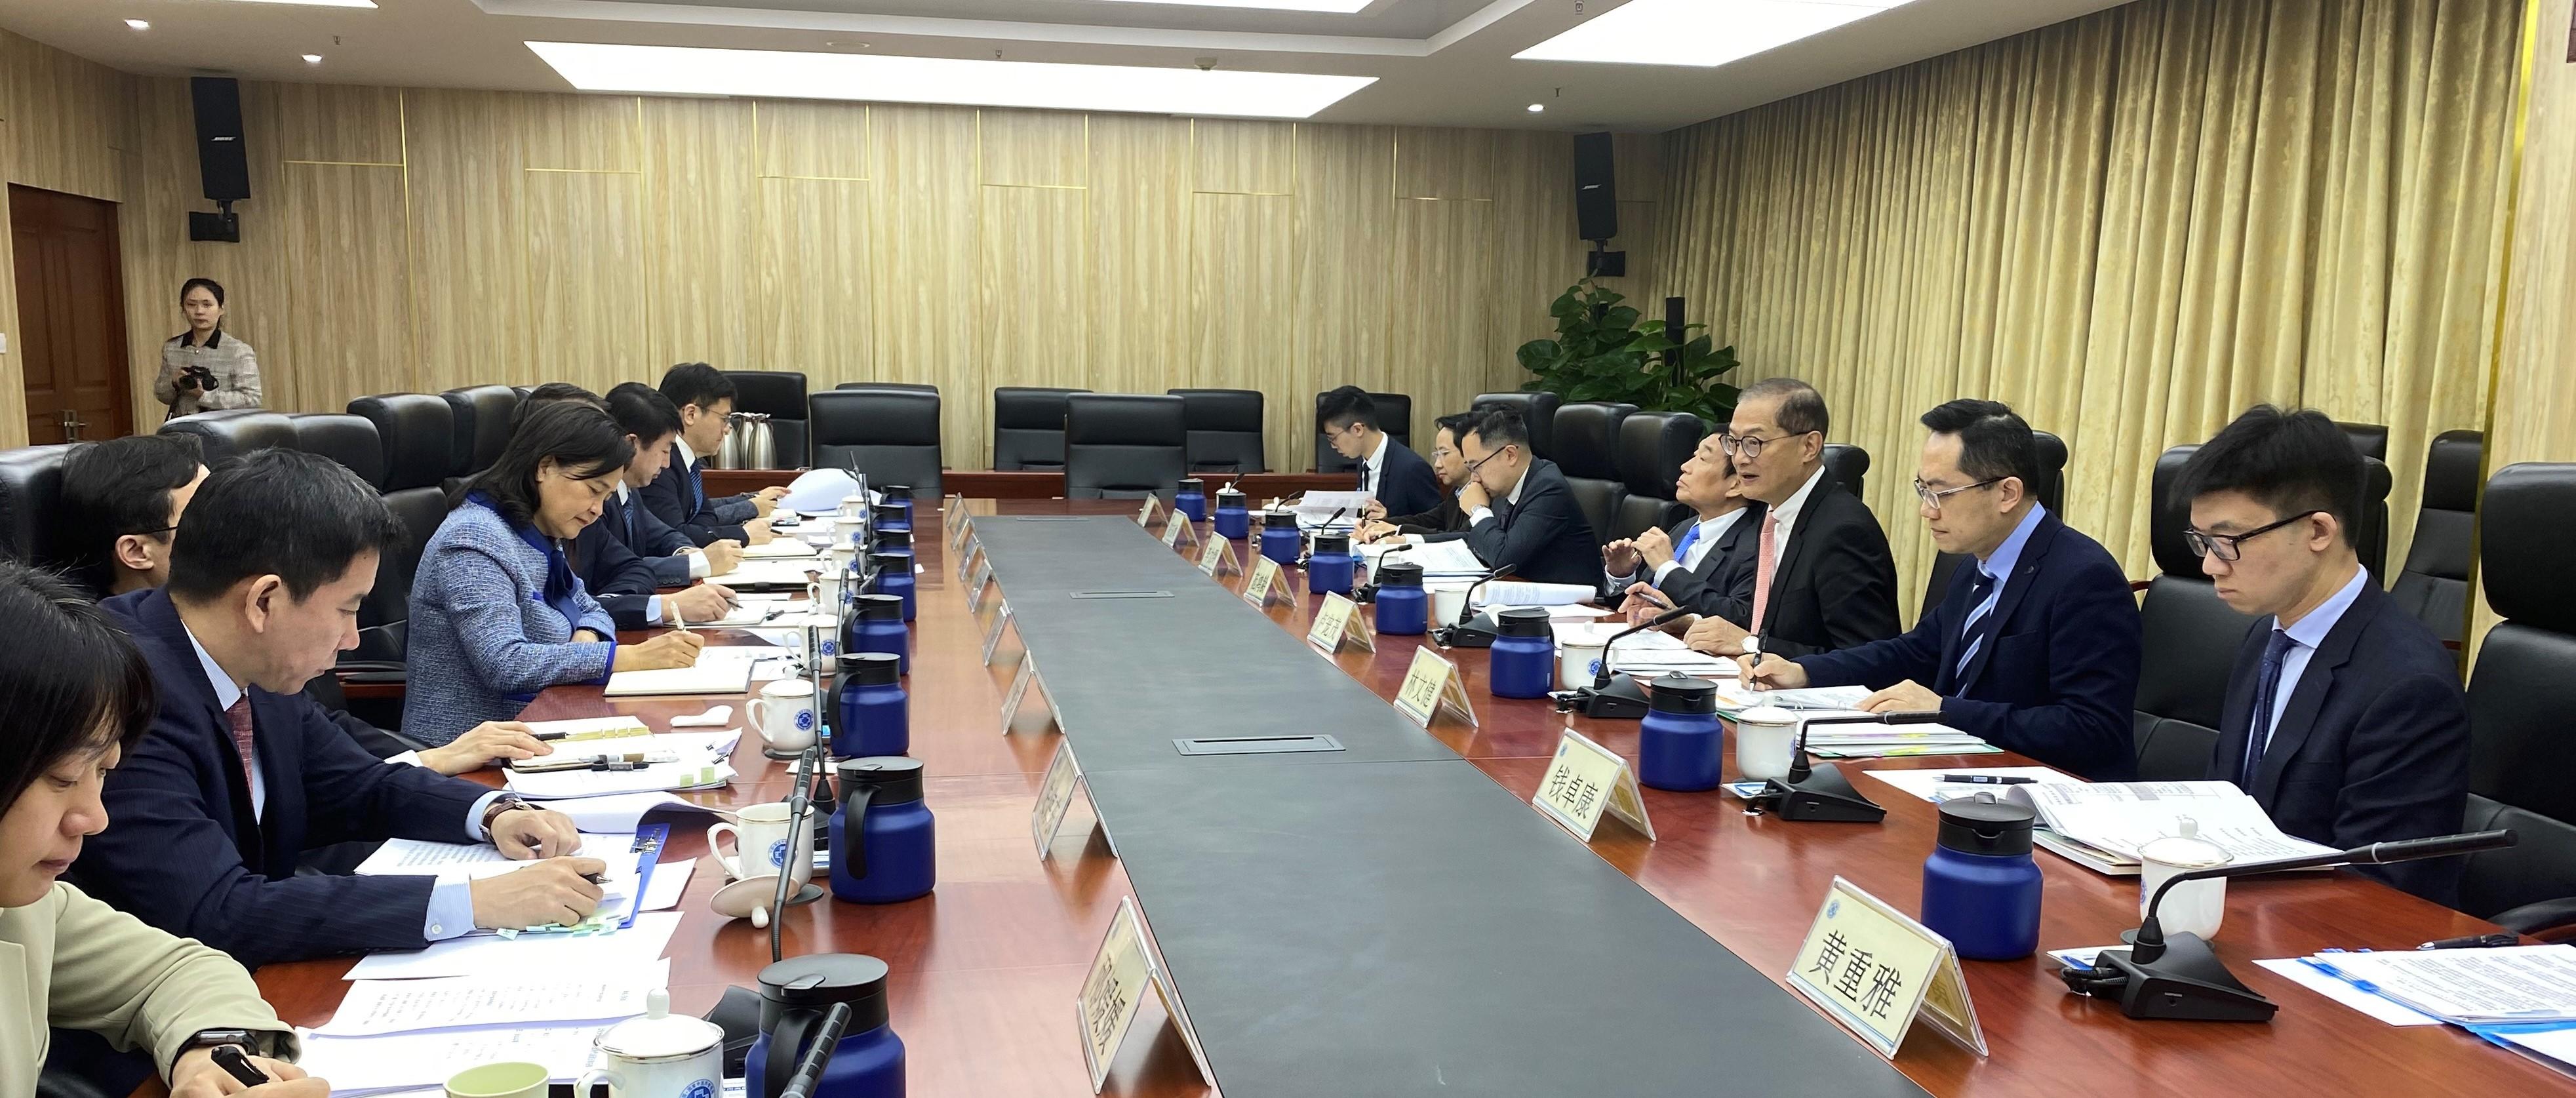 The Secretary for Health, Professor Lo Chung-mau and his delegation called on the National Administration of Traditional Chinese Medicine (NATCM) today (March 16). Photo shows Professor Lo (third right) in a meeting with the Party Secretary and Vice Commissioner of the NATCM, Professor Yu Yanhong (fourth left), with the Director of Health, Dr Ronald Lam (second right); Deputy Secretary for Health Mr Eddie Lee (fifth right); and the Chairman of the Hospital Authority, Mr Henry Fan (fourth right), in attendance.